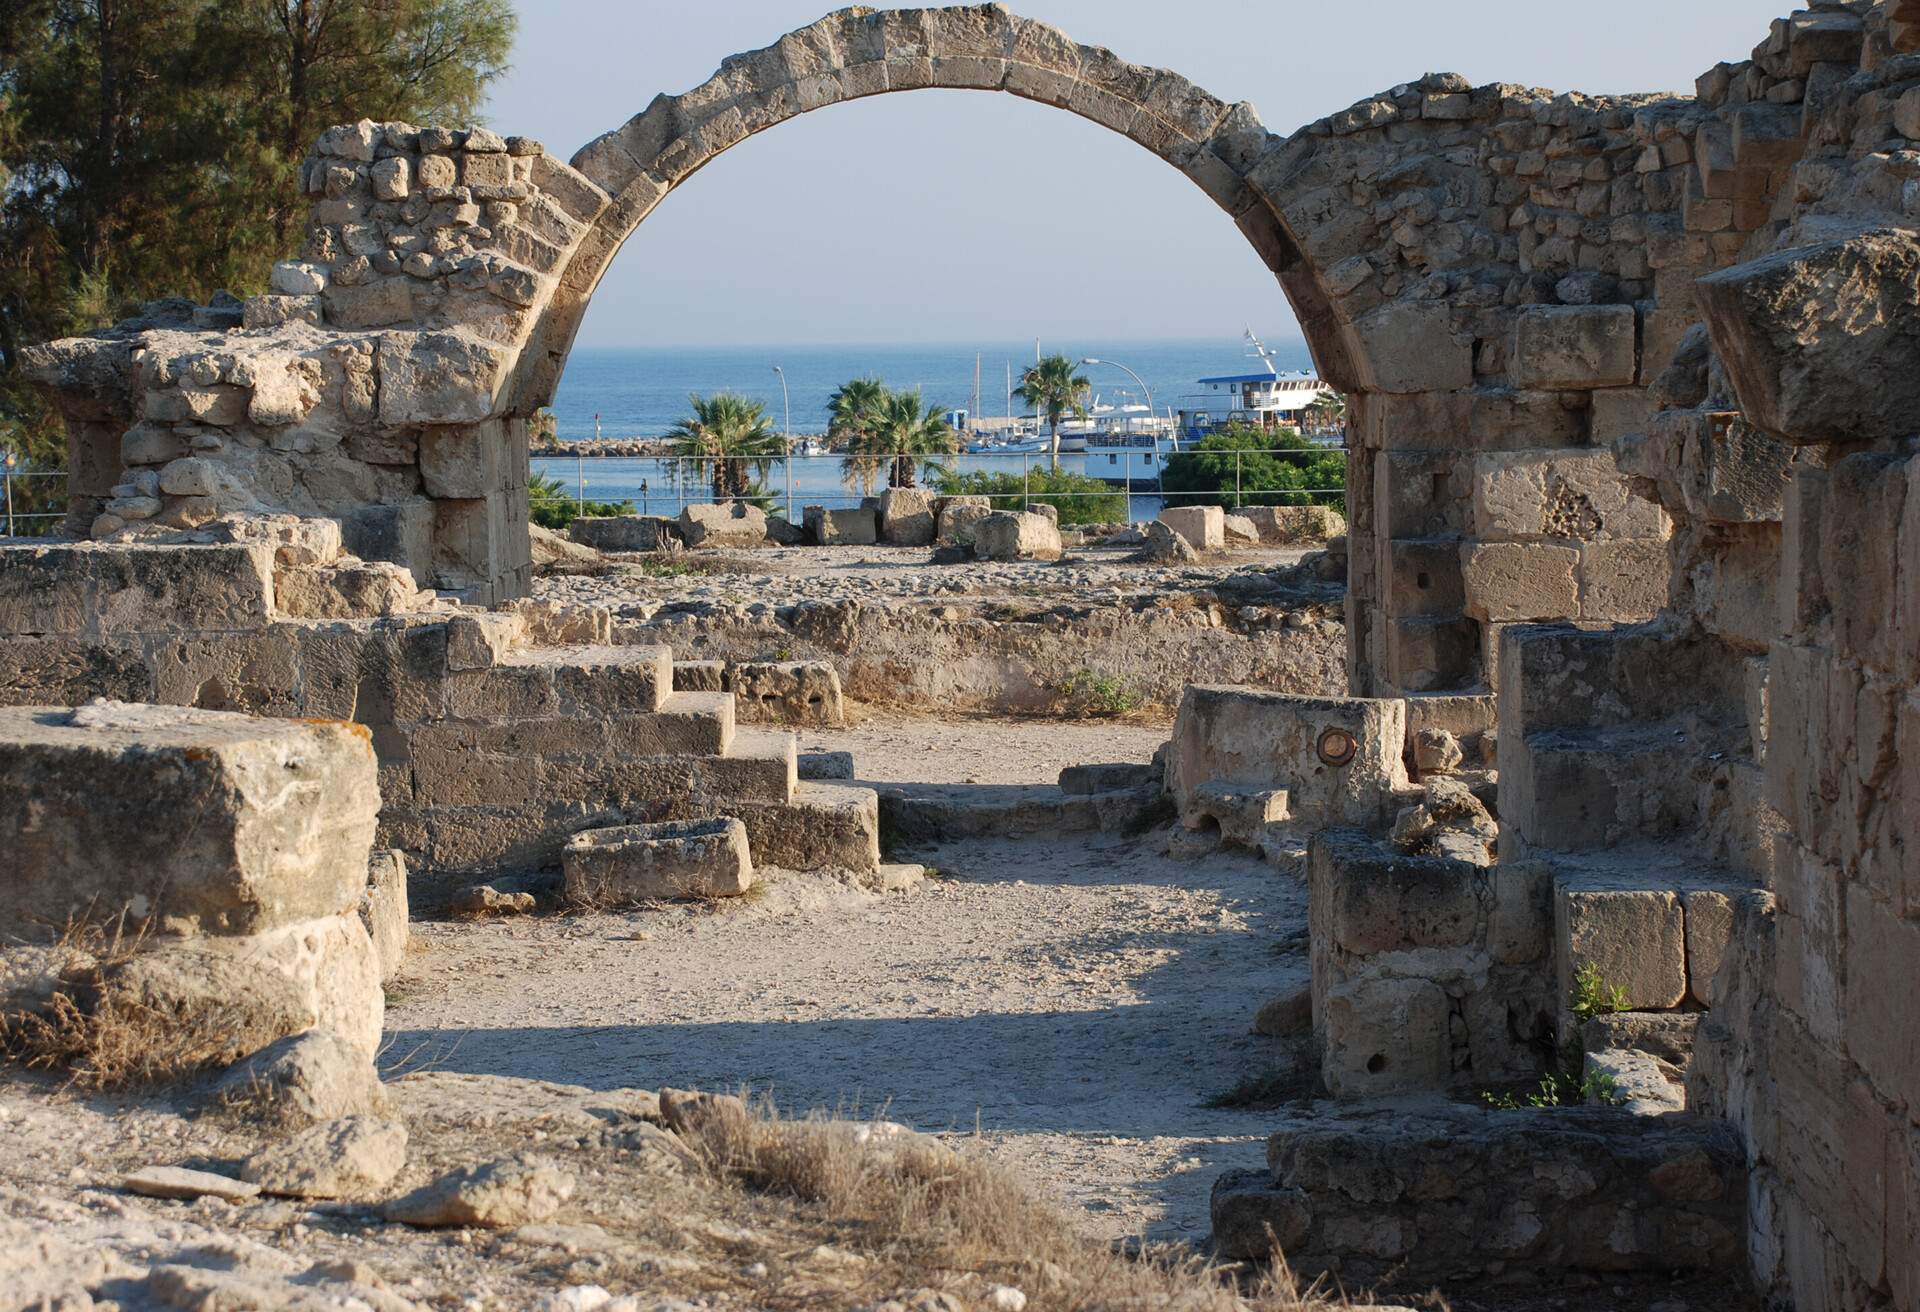 View through one of the ruined arches to Pafos Harbour, of the Byzantine castle known as Saranta Kolones (Forty Columns),located just north of the harbour of Pafos. View my Cyprus Lightbox for more superb pictures from Cyprus.